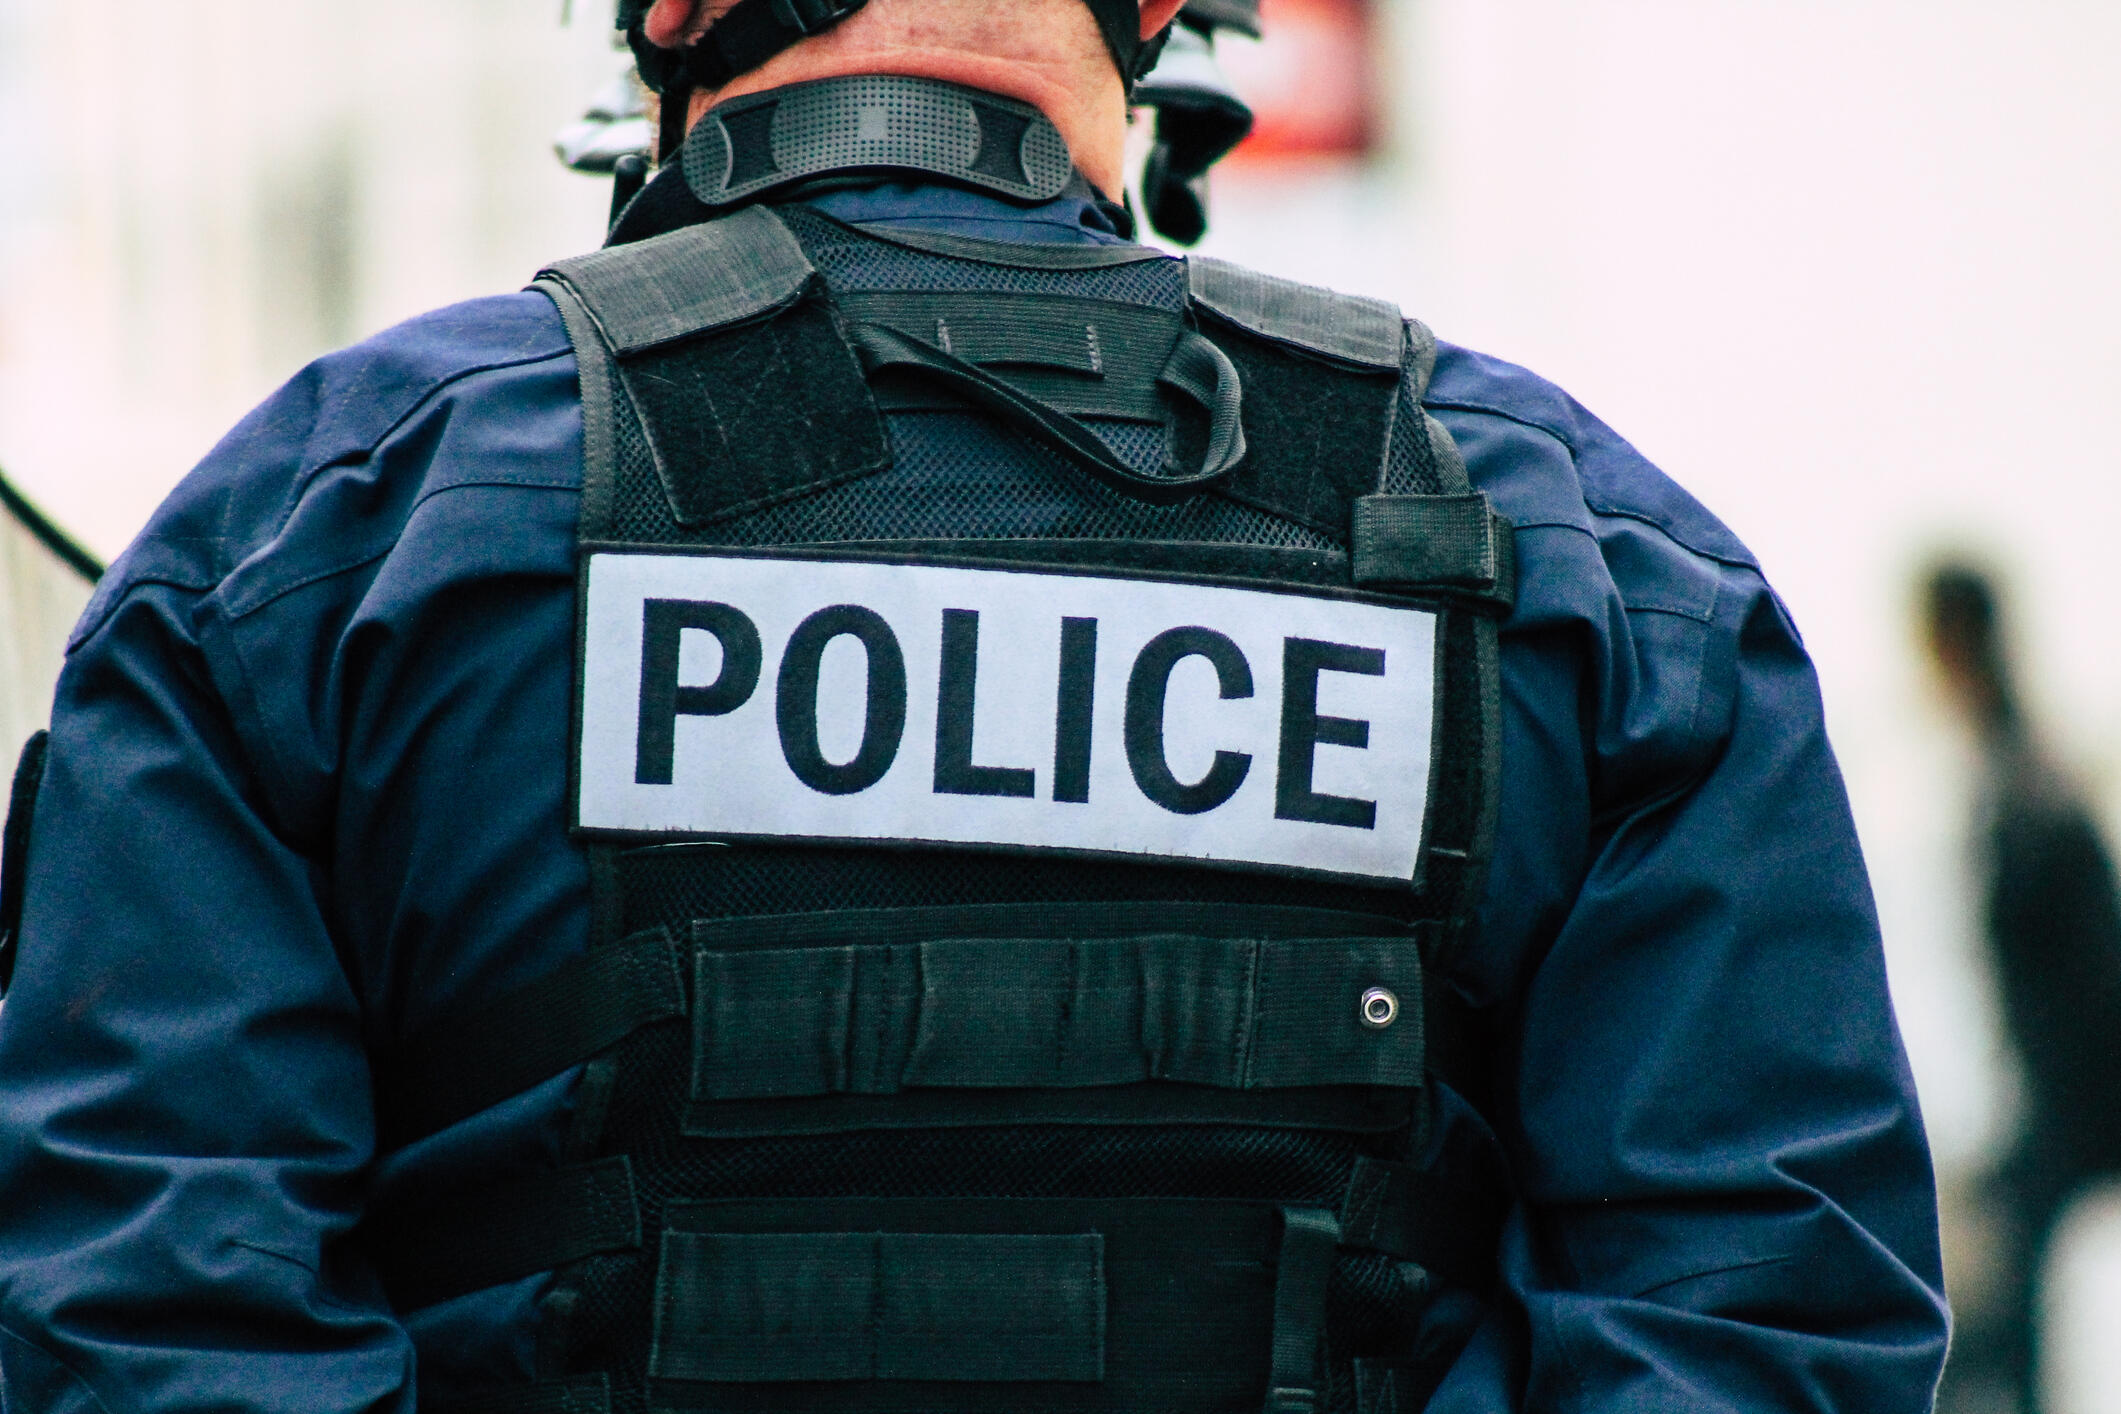 The History Of Law Enforcement On ‘Behind The Police’ | iHeart